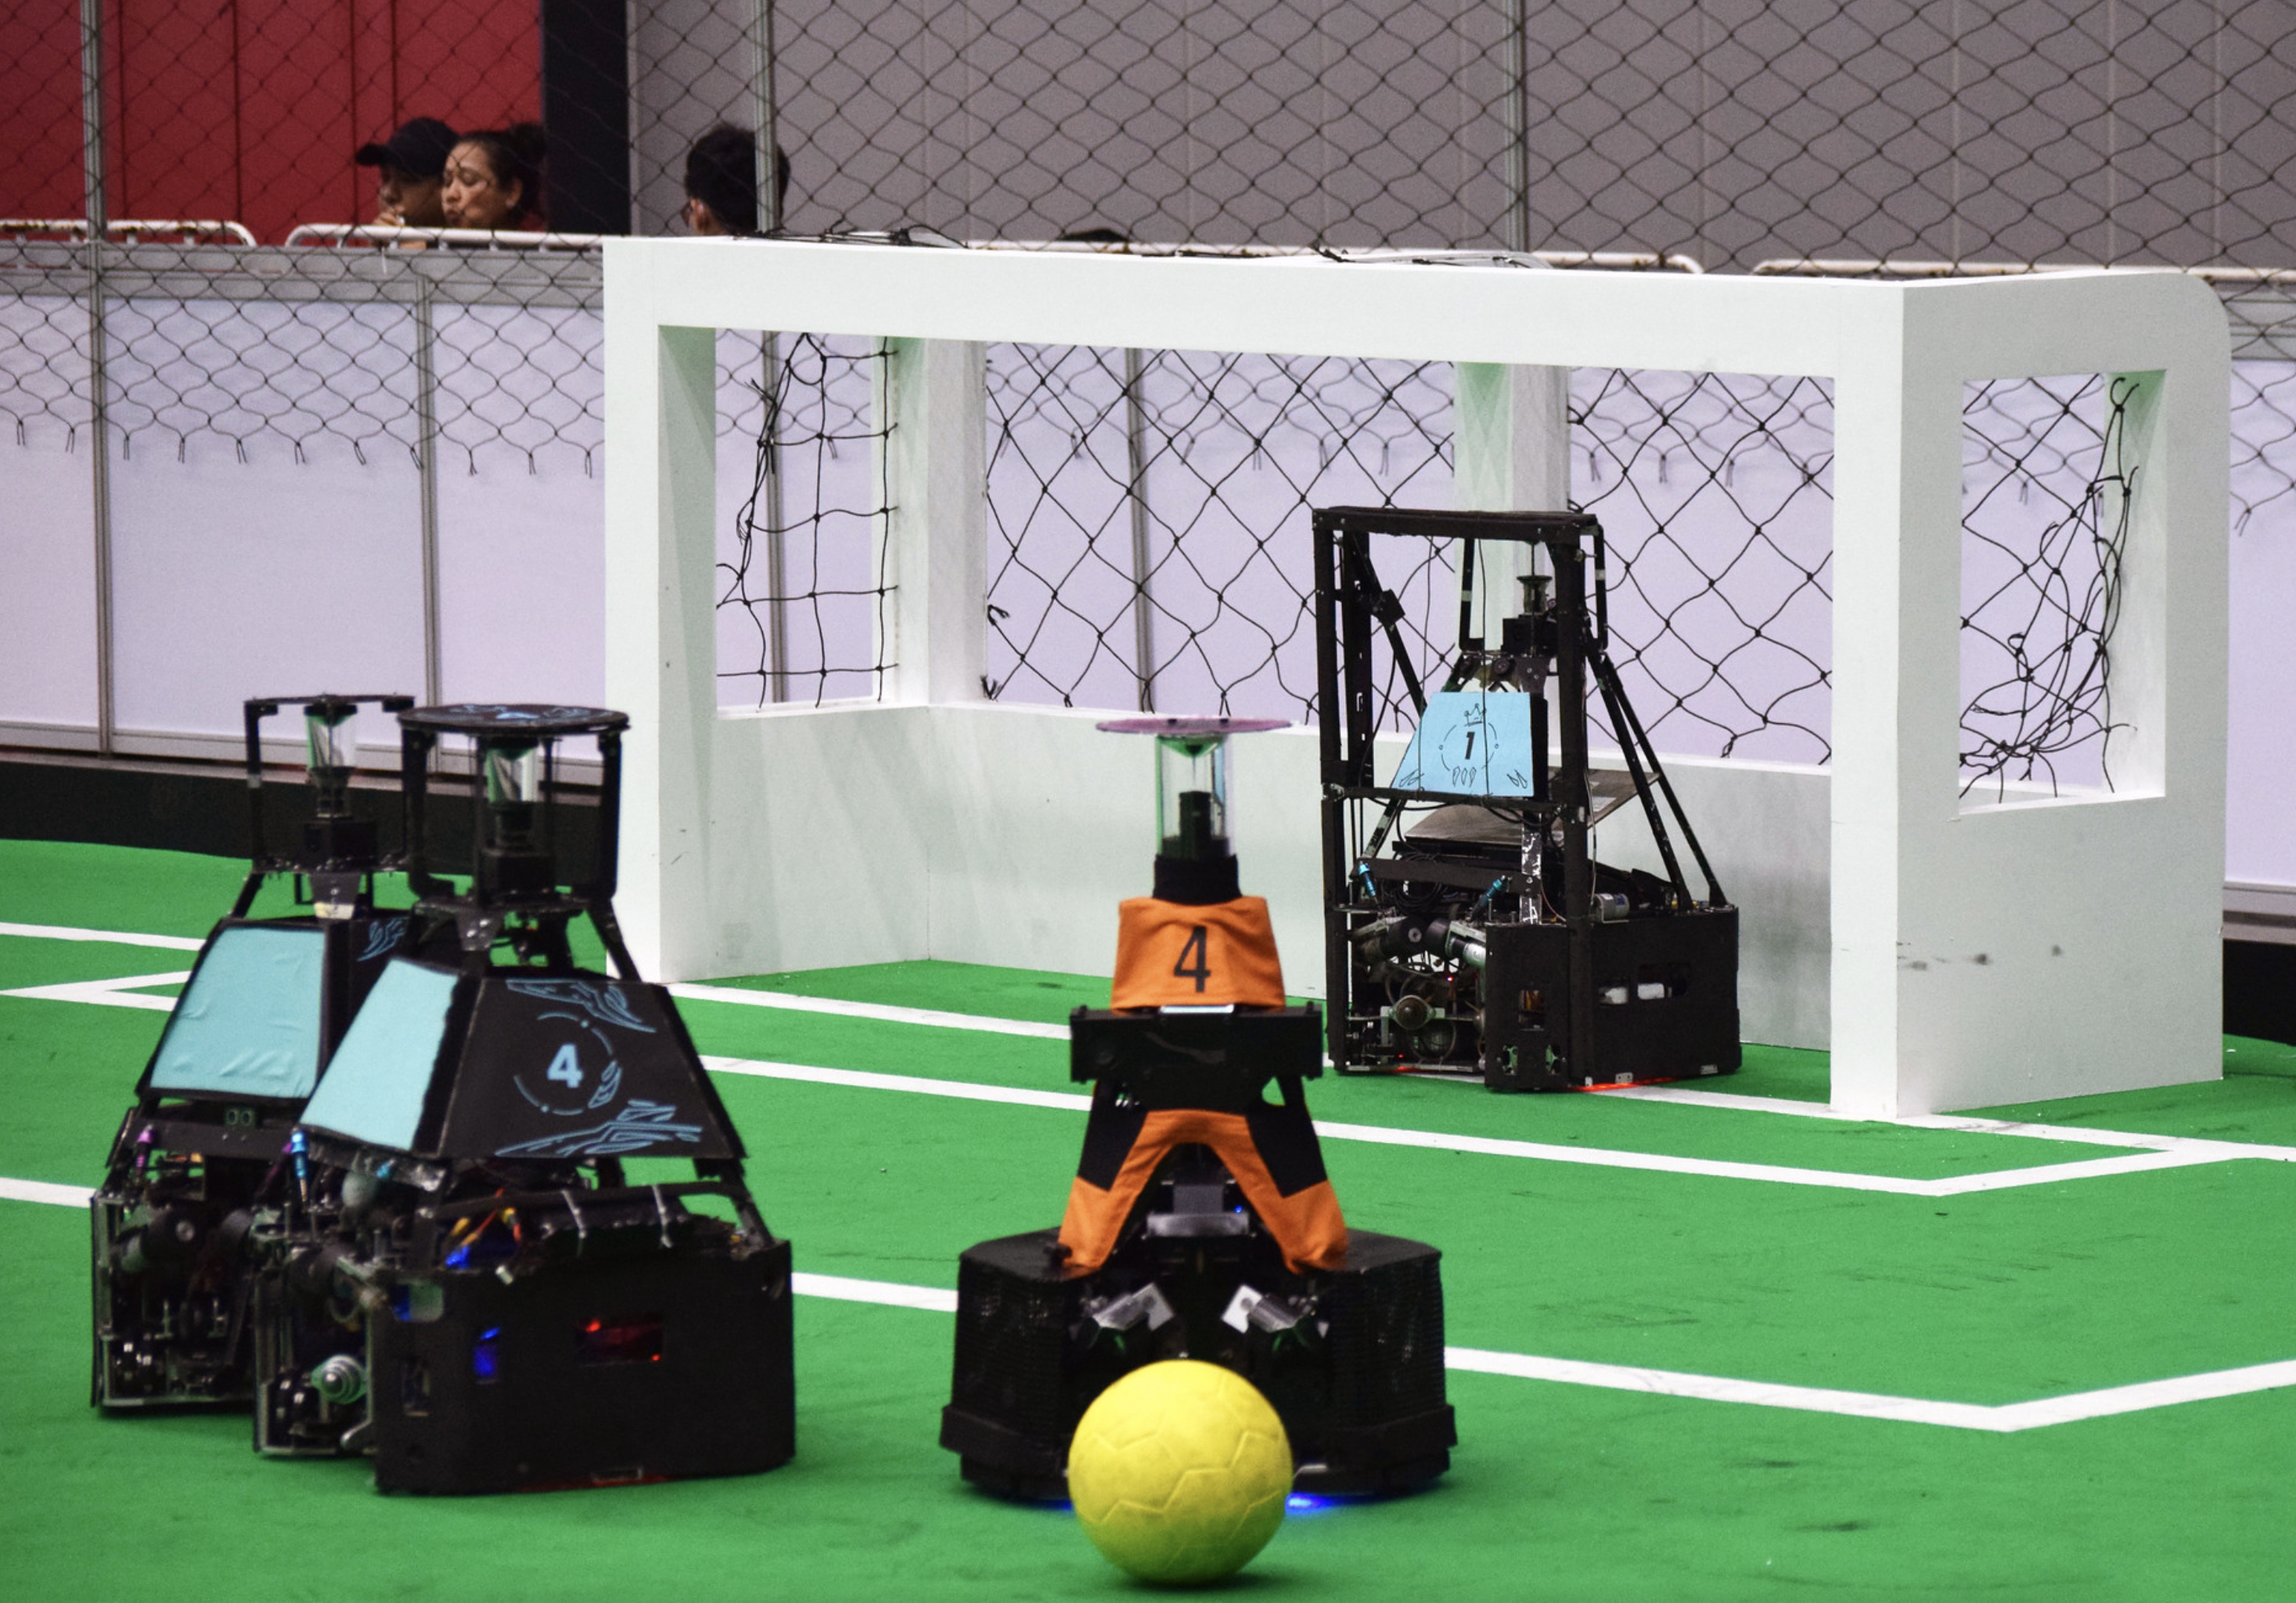 Eindhoven soccer and service robots clinch world titles again in Bangkok